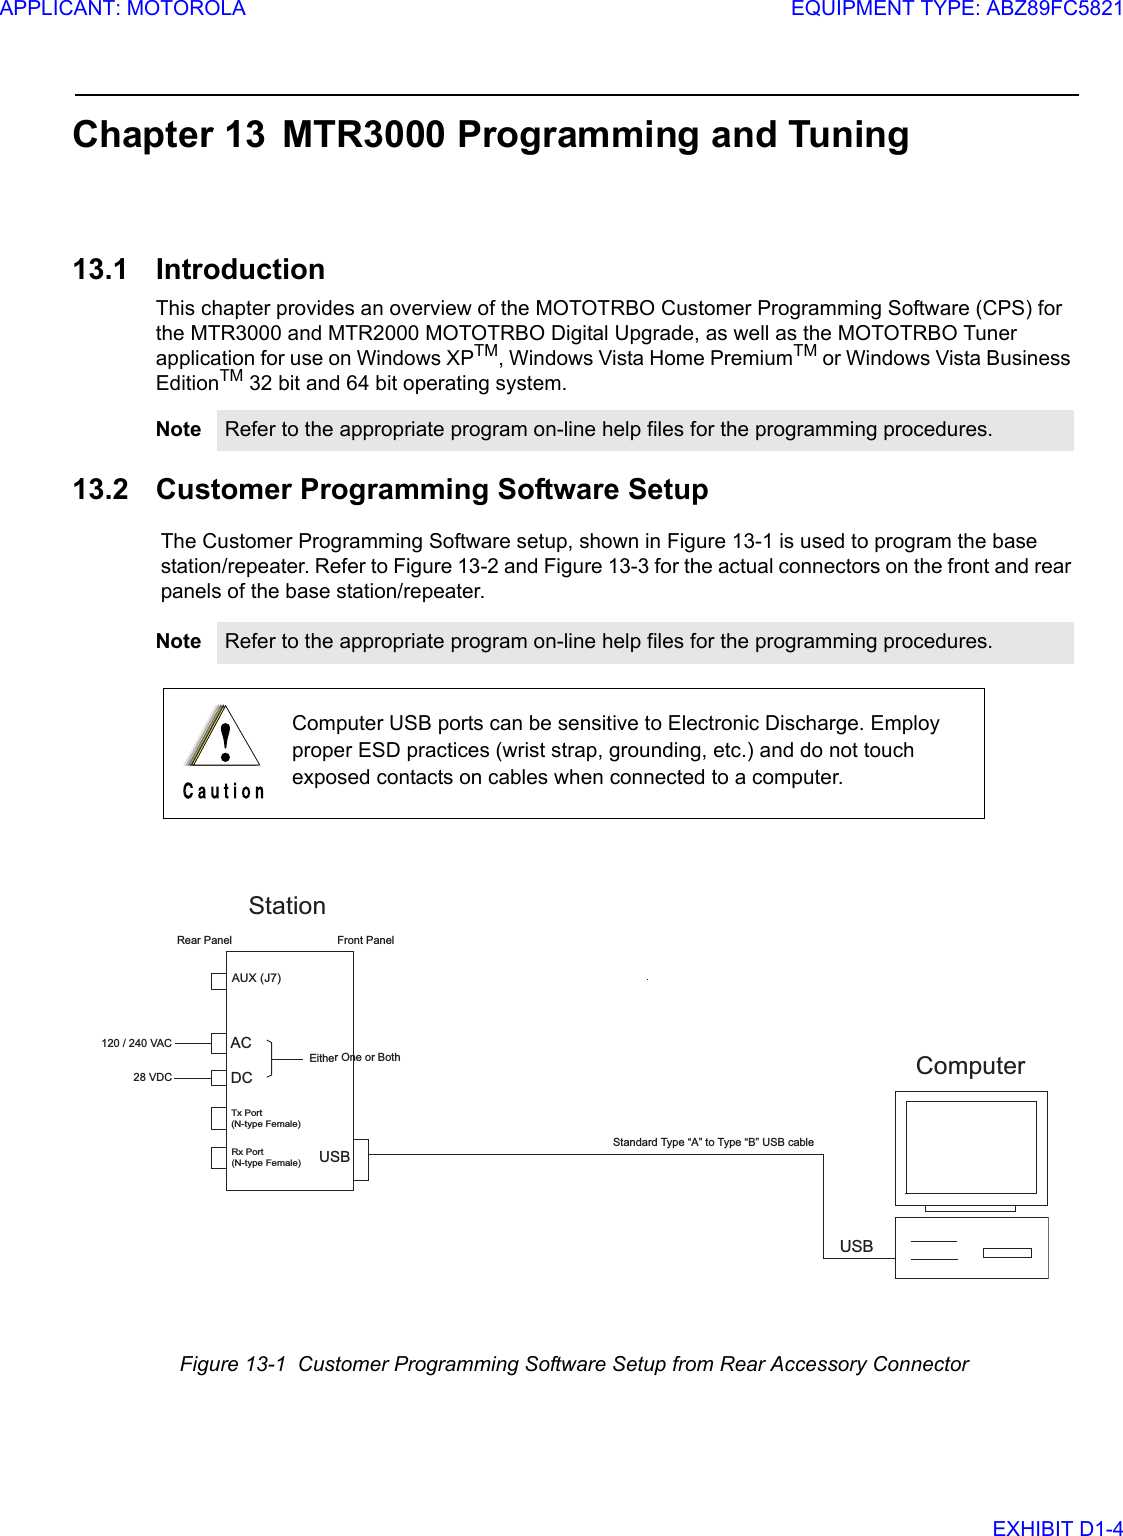 Chapter 13 MTR3000 Programming and Tuning13.1 IntroductionThis chapter provides an overview of the MOTOTRBO Customer Programming Software (CPS) for the MTR3000 and MTR2000 MOTOTRBO Digital Upgrade, as well as the MOTOTRBO Tuner application for use on Windows XPTM, Windows Vista Home PremiumTM or Windows Vista Business EditionTM 32 bit and 64 bit operating system. 13.2 Customer Programming Software SetupThe Customer Programming Software setup, shown in Figure 13-1 is used to program the base station/repeater. Refer to Figure 13-2 and Figure 13-3 for the actual connectors on the front and rear panels of the base station/repeater.Note Refer to the appropriate program on-line help files for the programming procedures.Note Refer to the appropriate program on-line help files for the programming procedures.Computer USB ports can be sensitive to Electronic Discharge. Employ proper ESD practices (wrist strap, grounding, etc.) and do not touch exposed contacts on cables when connected to a computer.Figure 13-1  Customer Programming Software Setup from Rear Accessory ConnectorFront PanelUSBACUSB120 / 240 VACStationTx Port(N-type Female)Rx Port(N-type Female)AUX (J7)DC28 VDCEither One or BothStandard Type “A” to Type “B” USB cable Rear PanelComputerAPPLICANT: MOTOROLAEQUIPMENT TYPE: ABZ89FC5821EXHIBIT D1-4